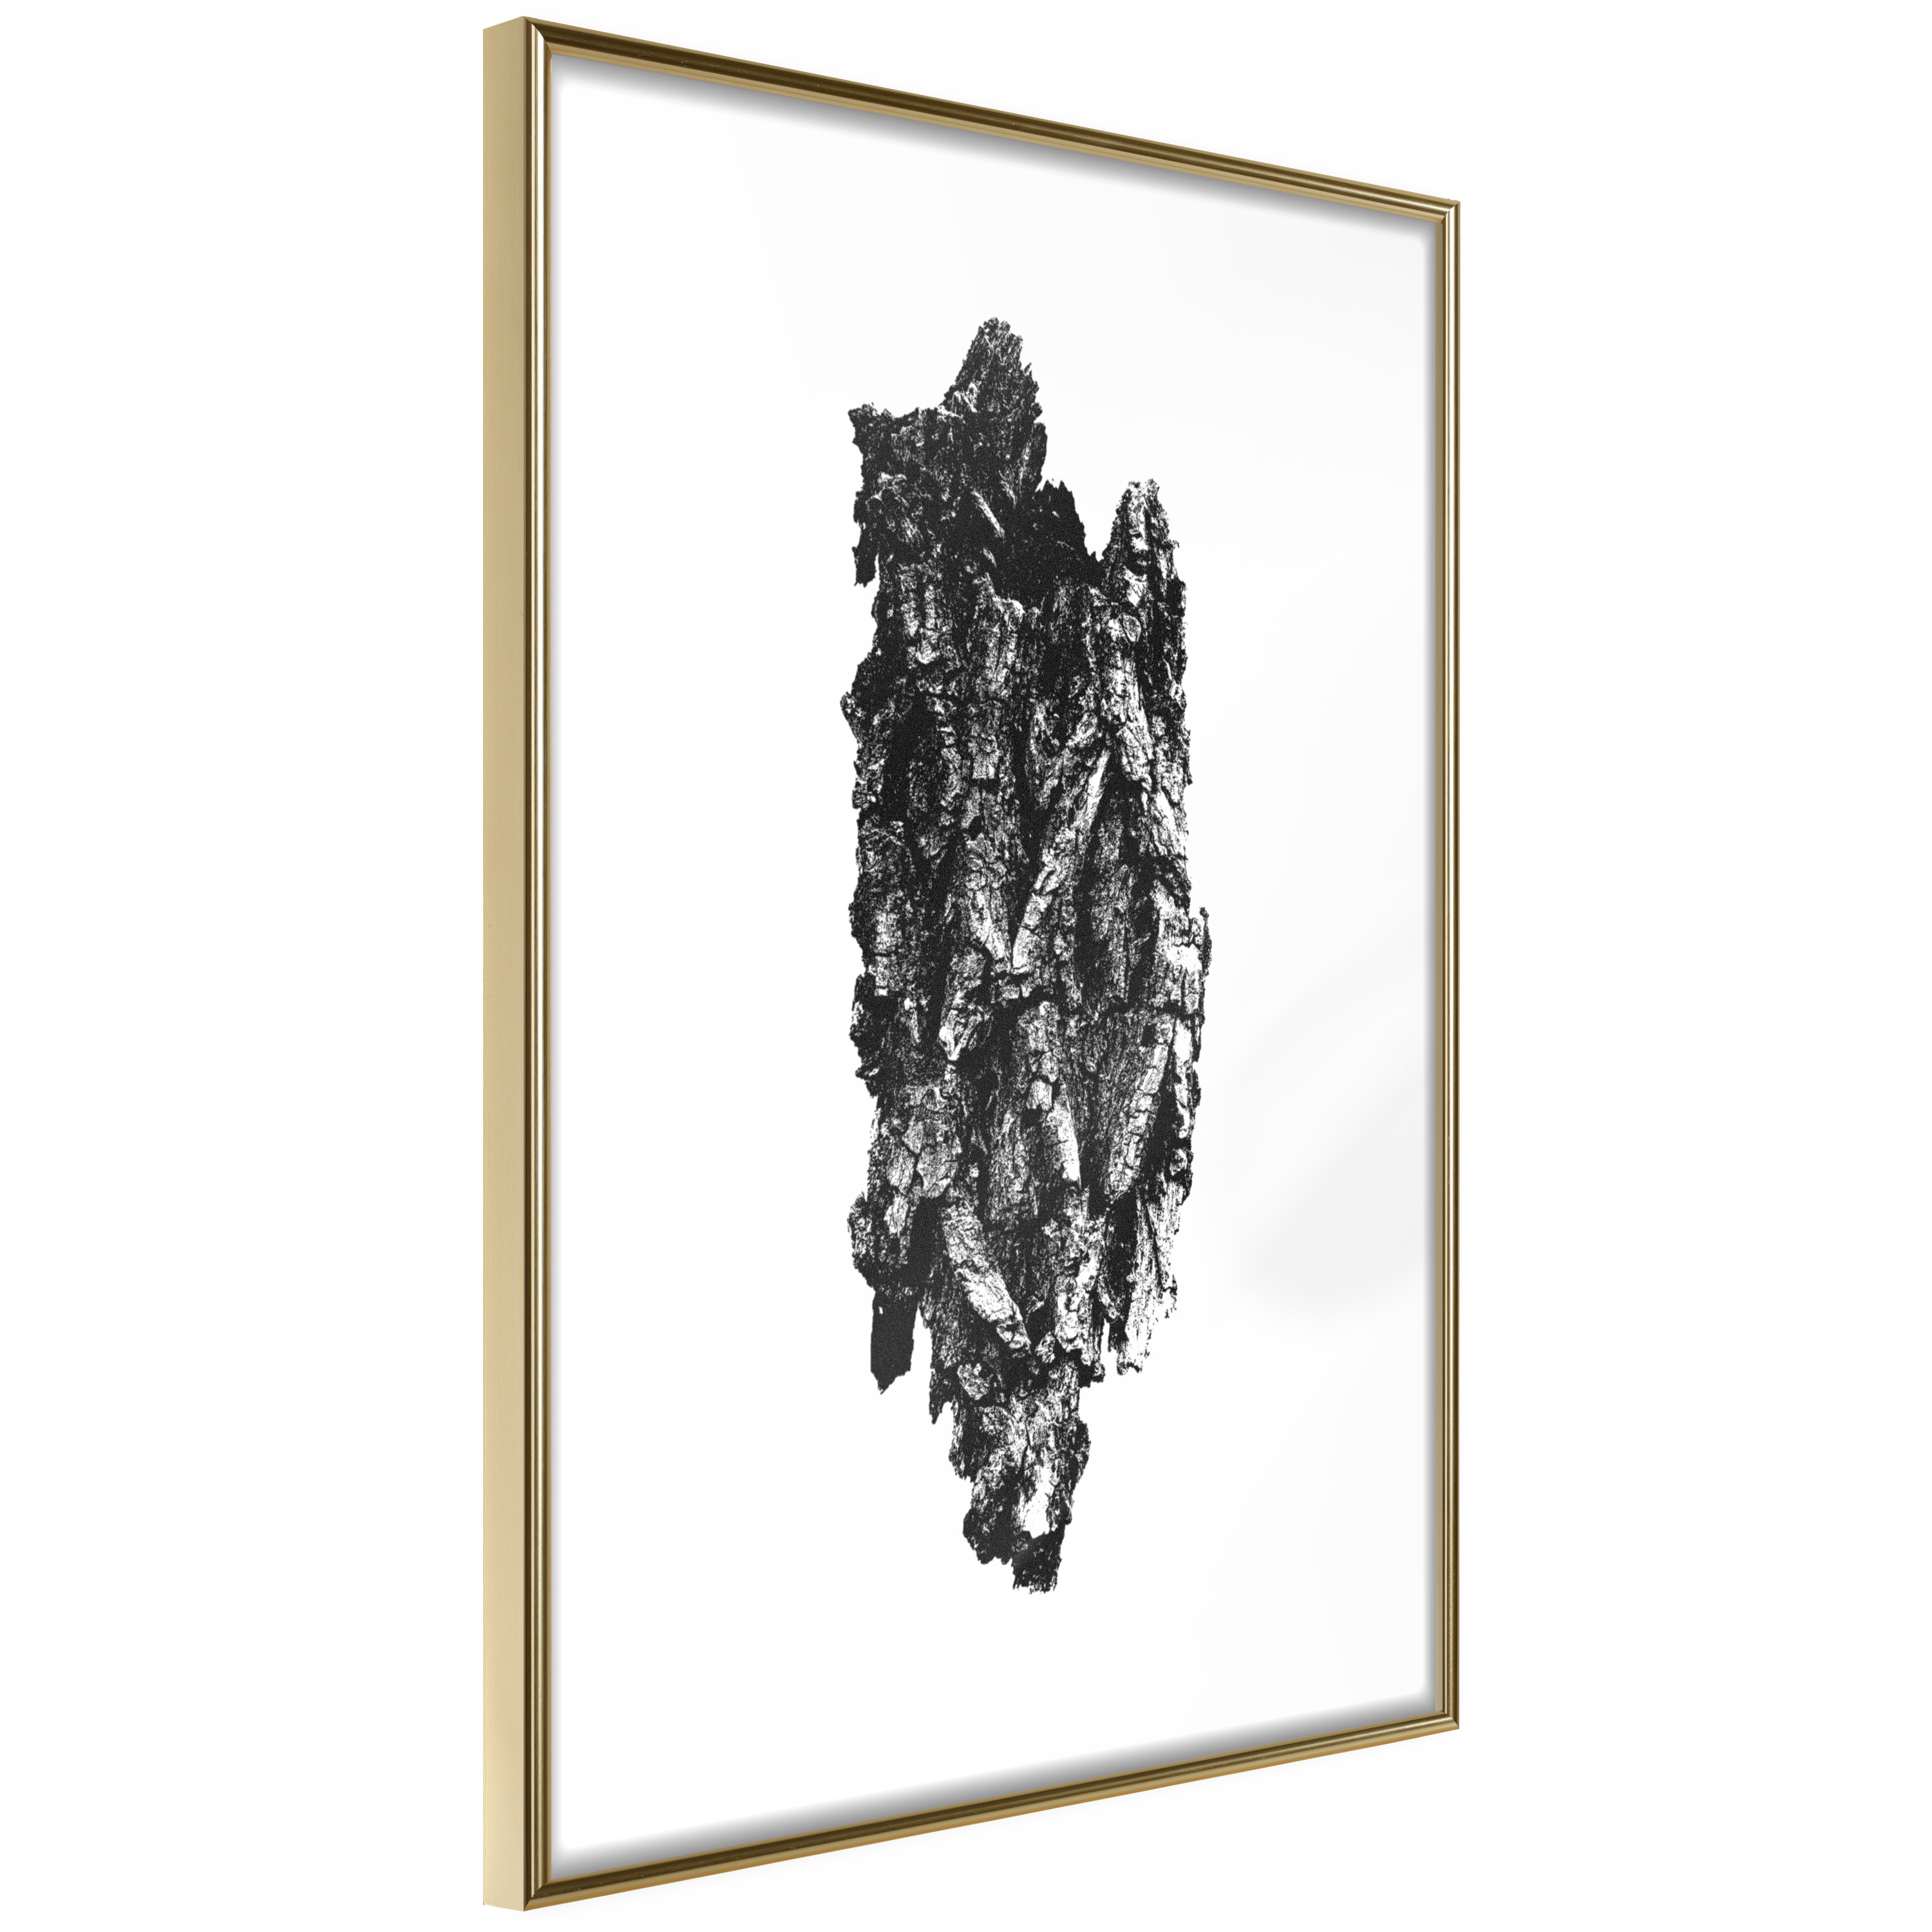 Poster - Texture of a Tree - 30x45